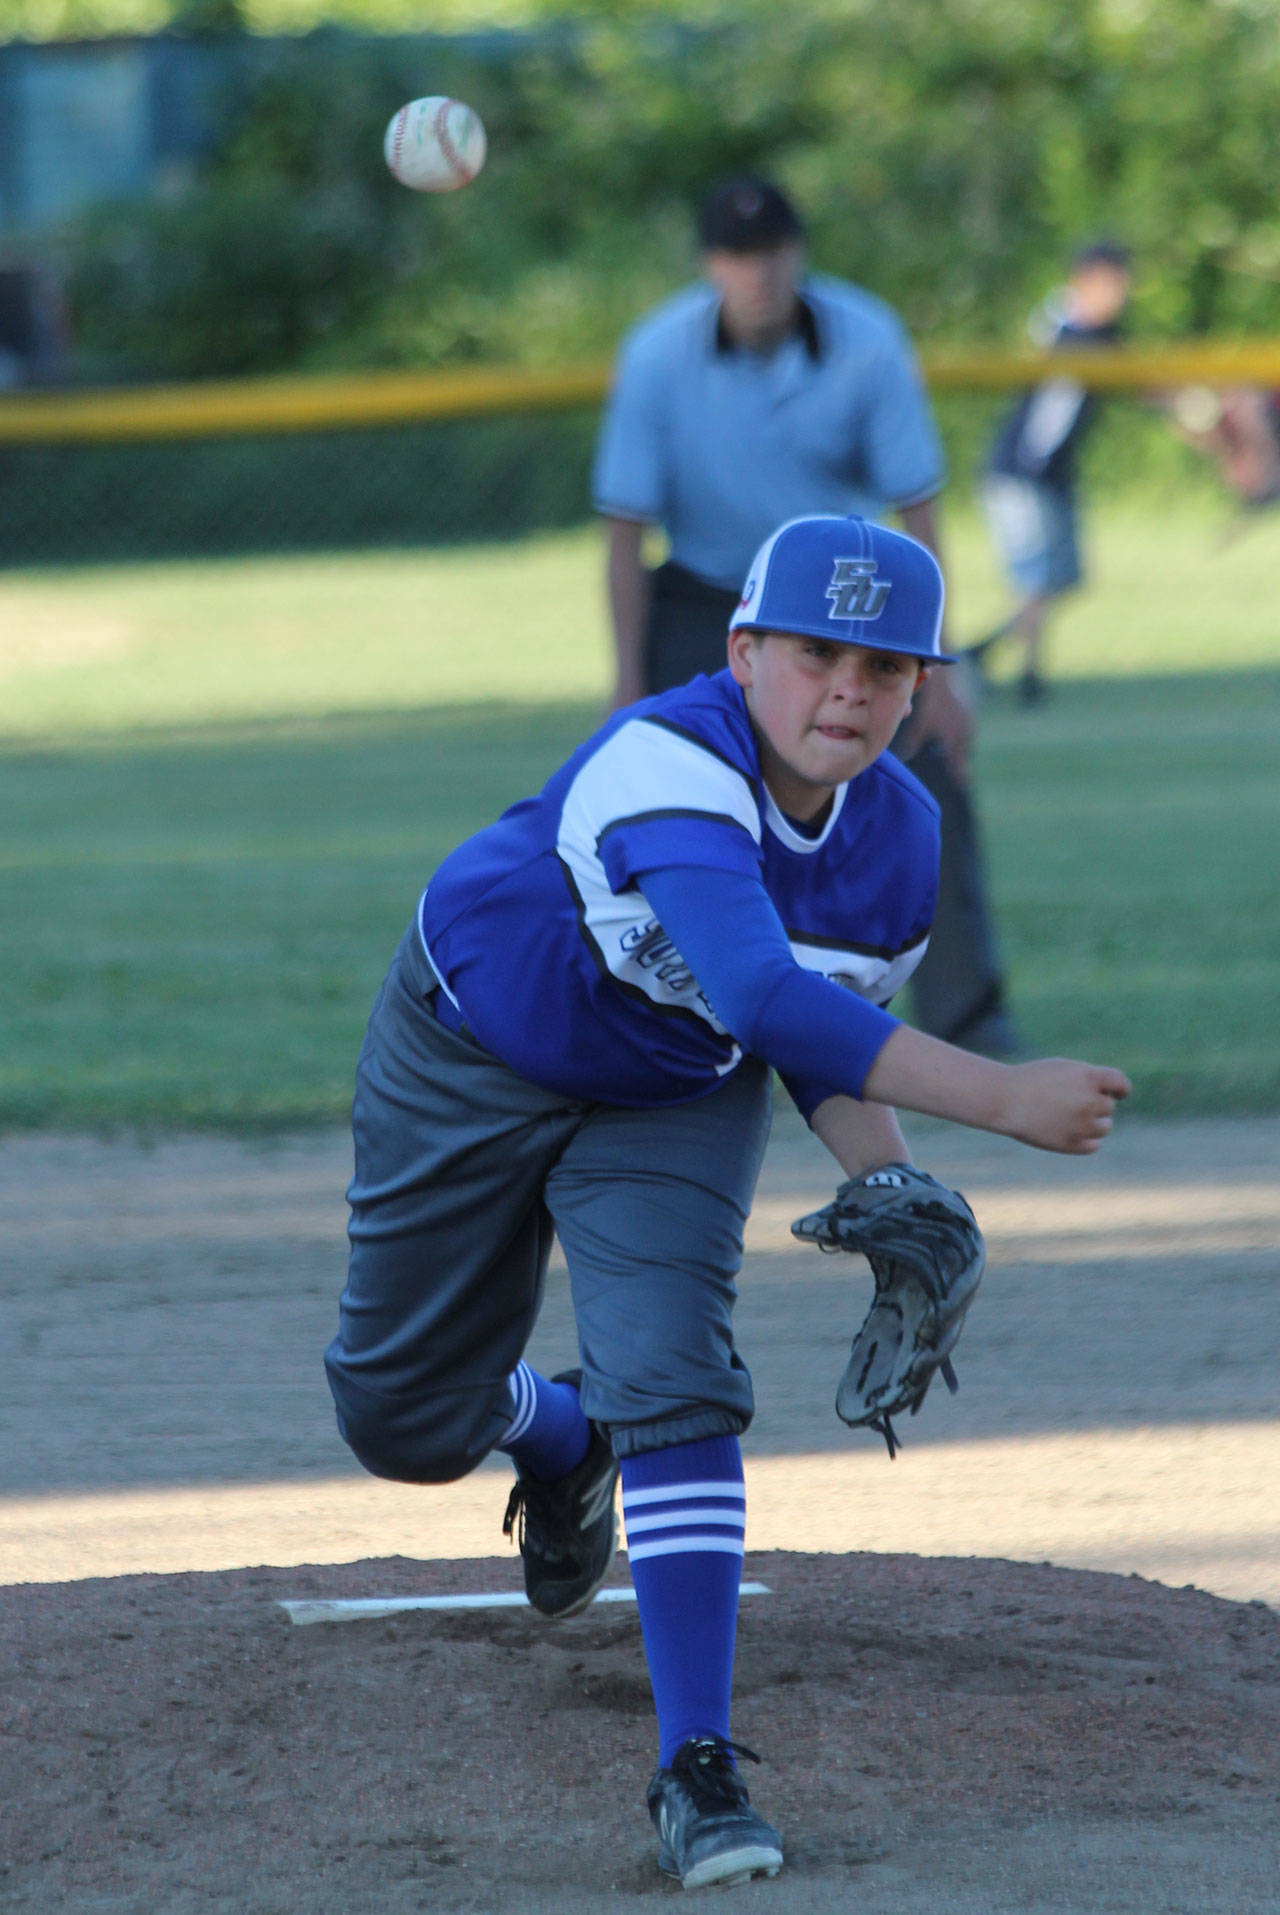 Liam Petty tosses a pitch against Sedro-Woolley Tuesday.(Photo by Jim Waller/South Whidbey Record)